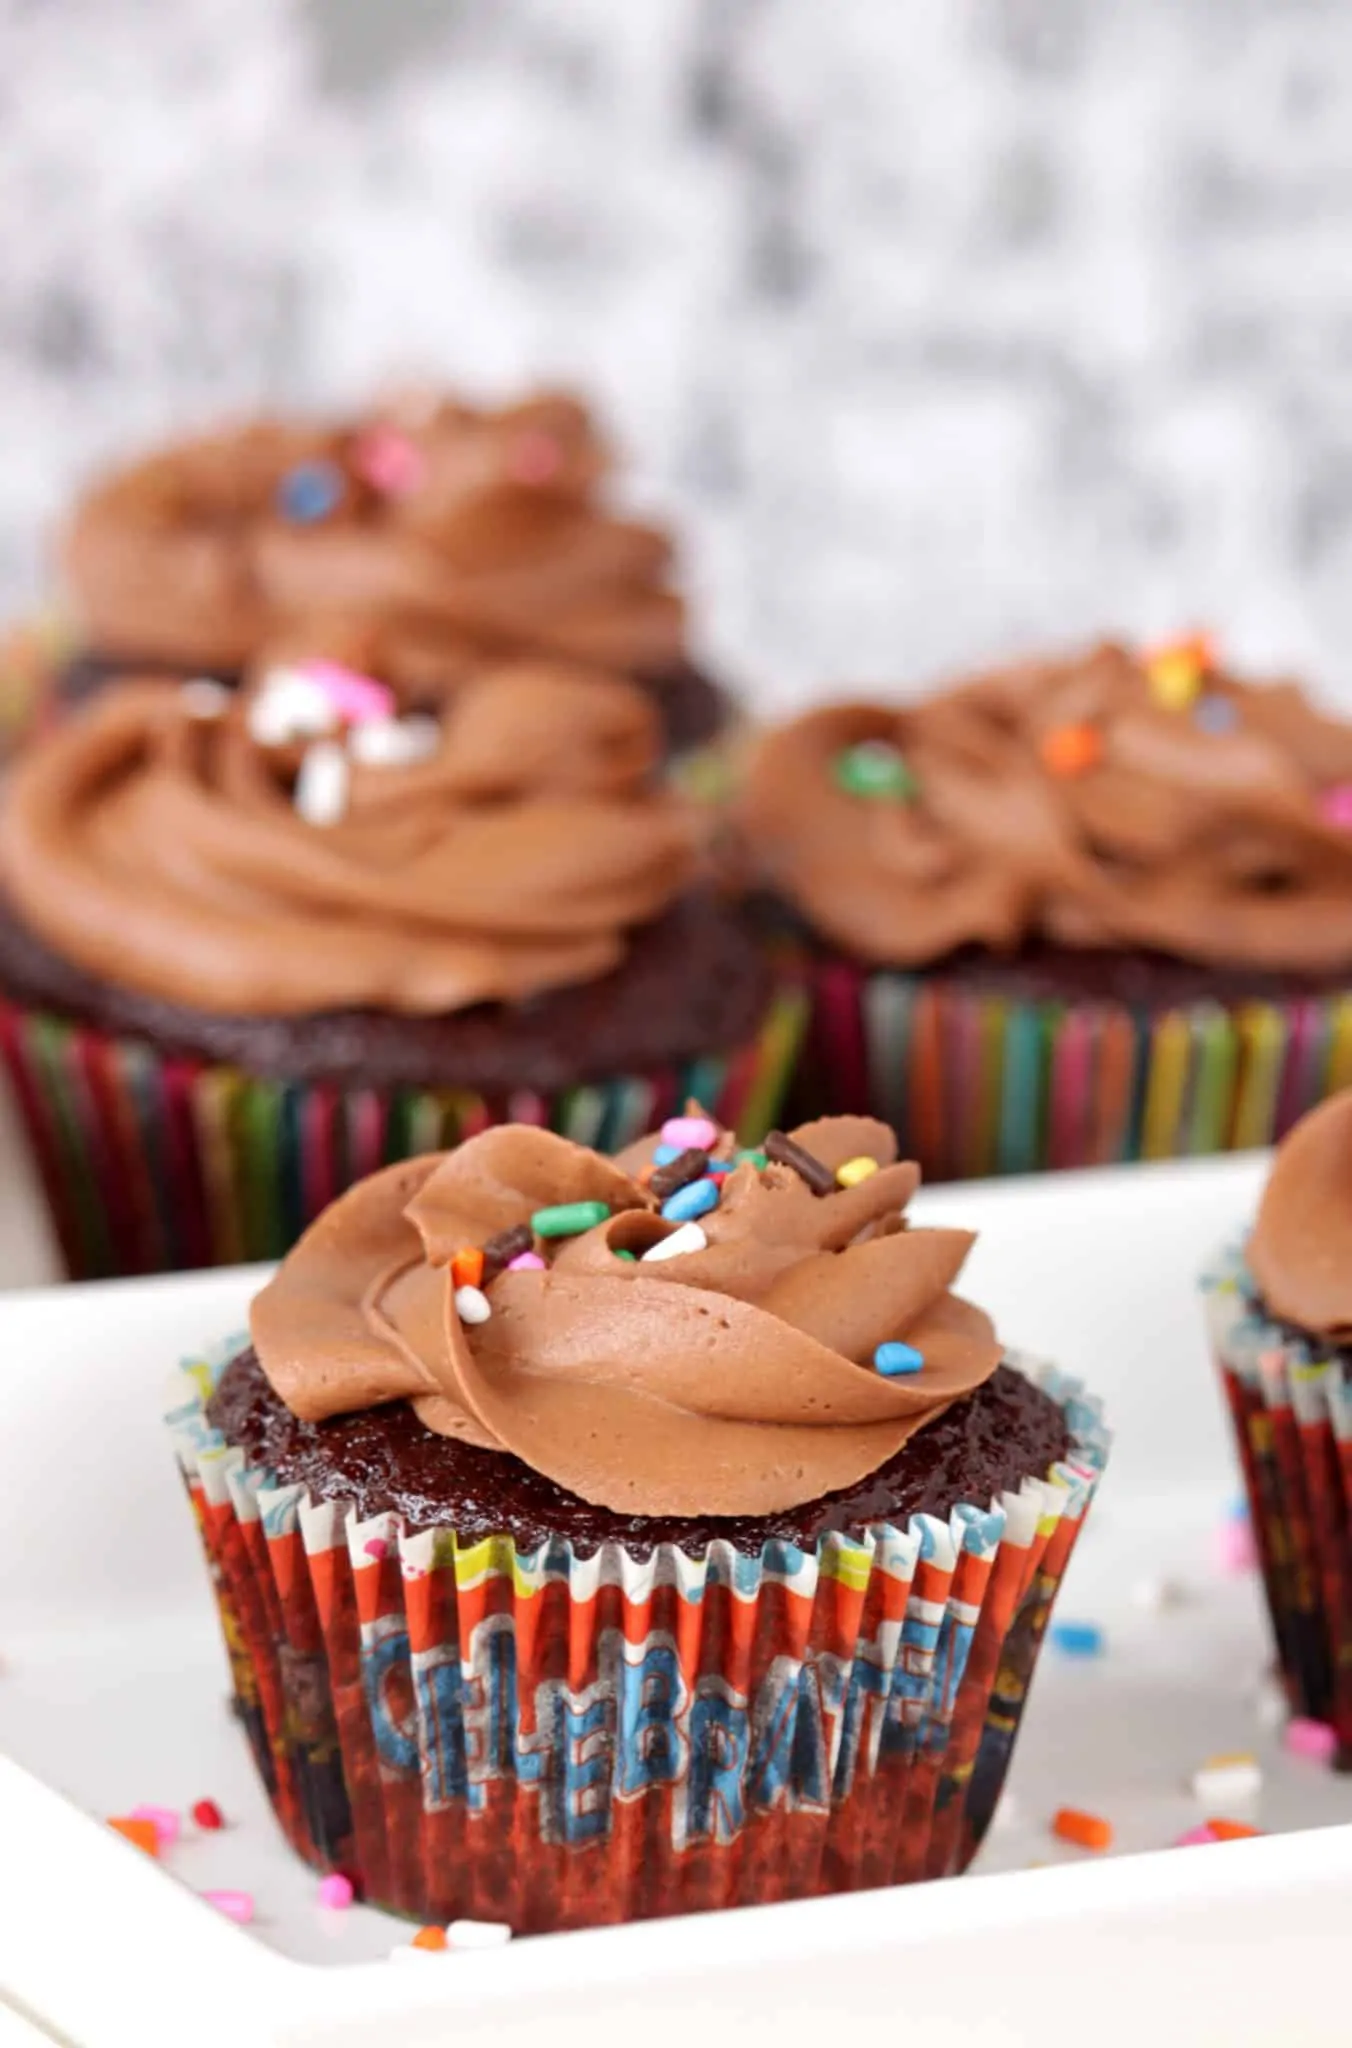  Chocolate Cupcakes with Chocolate Buttercream Frosting with others cupcake